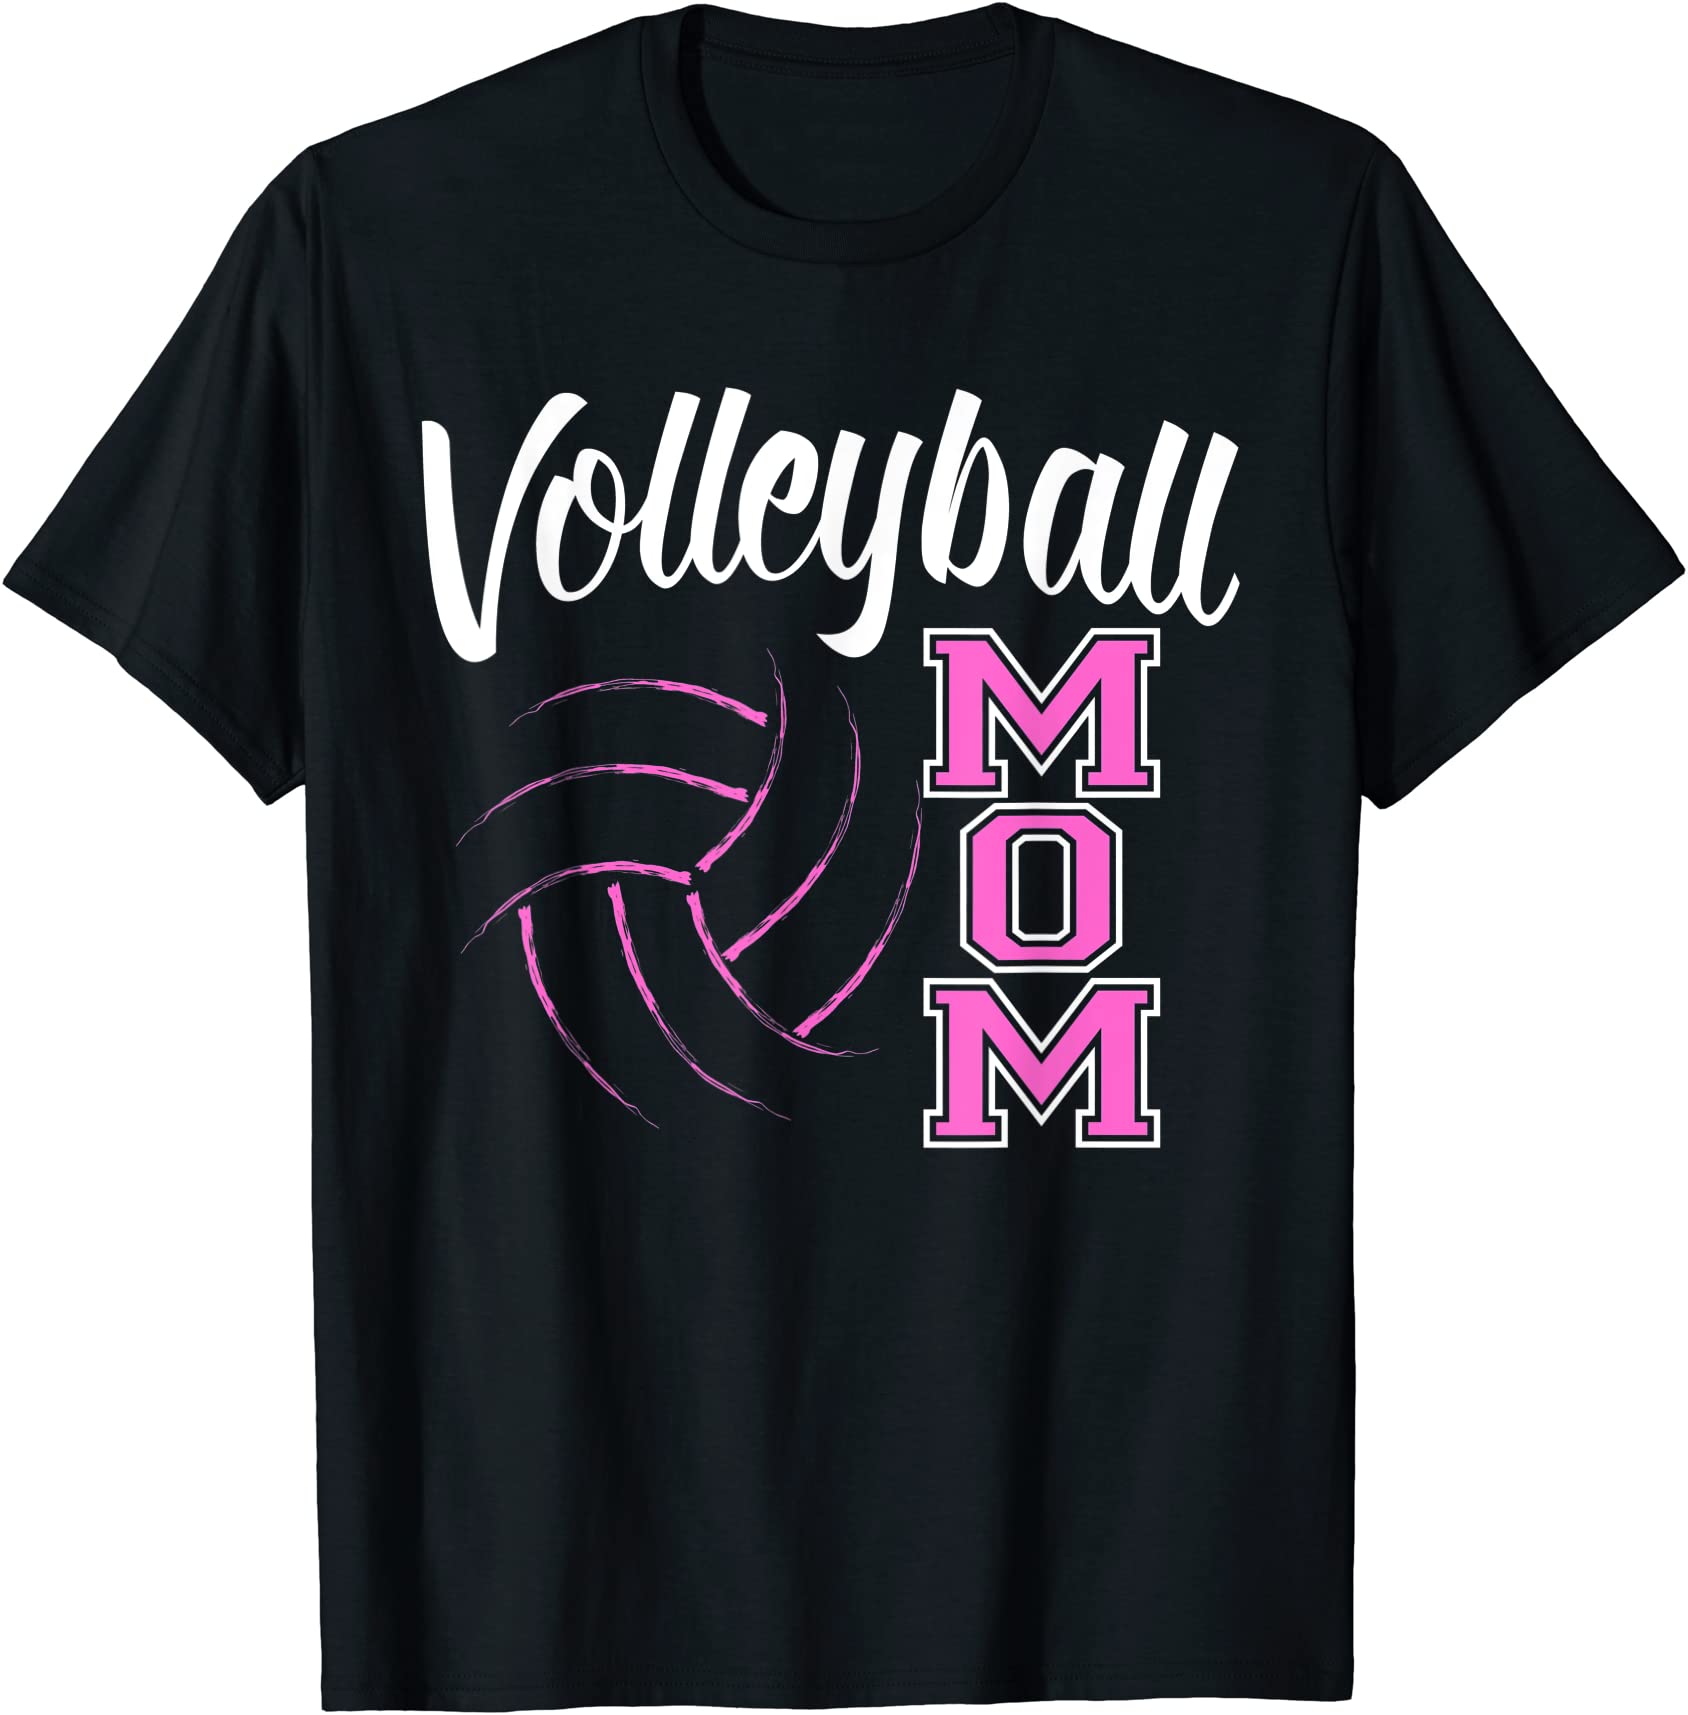 volleyball shirts for women volleyball mom t shirt men - Buy t-shirt ...